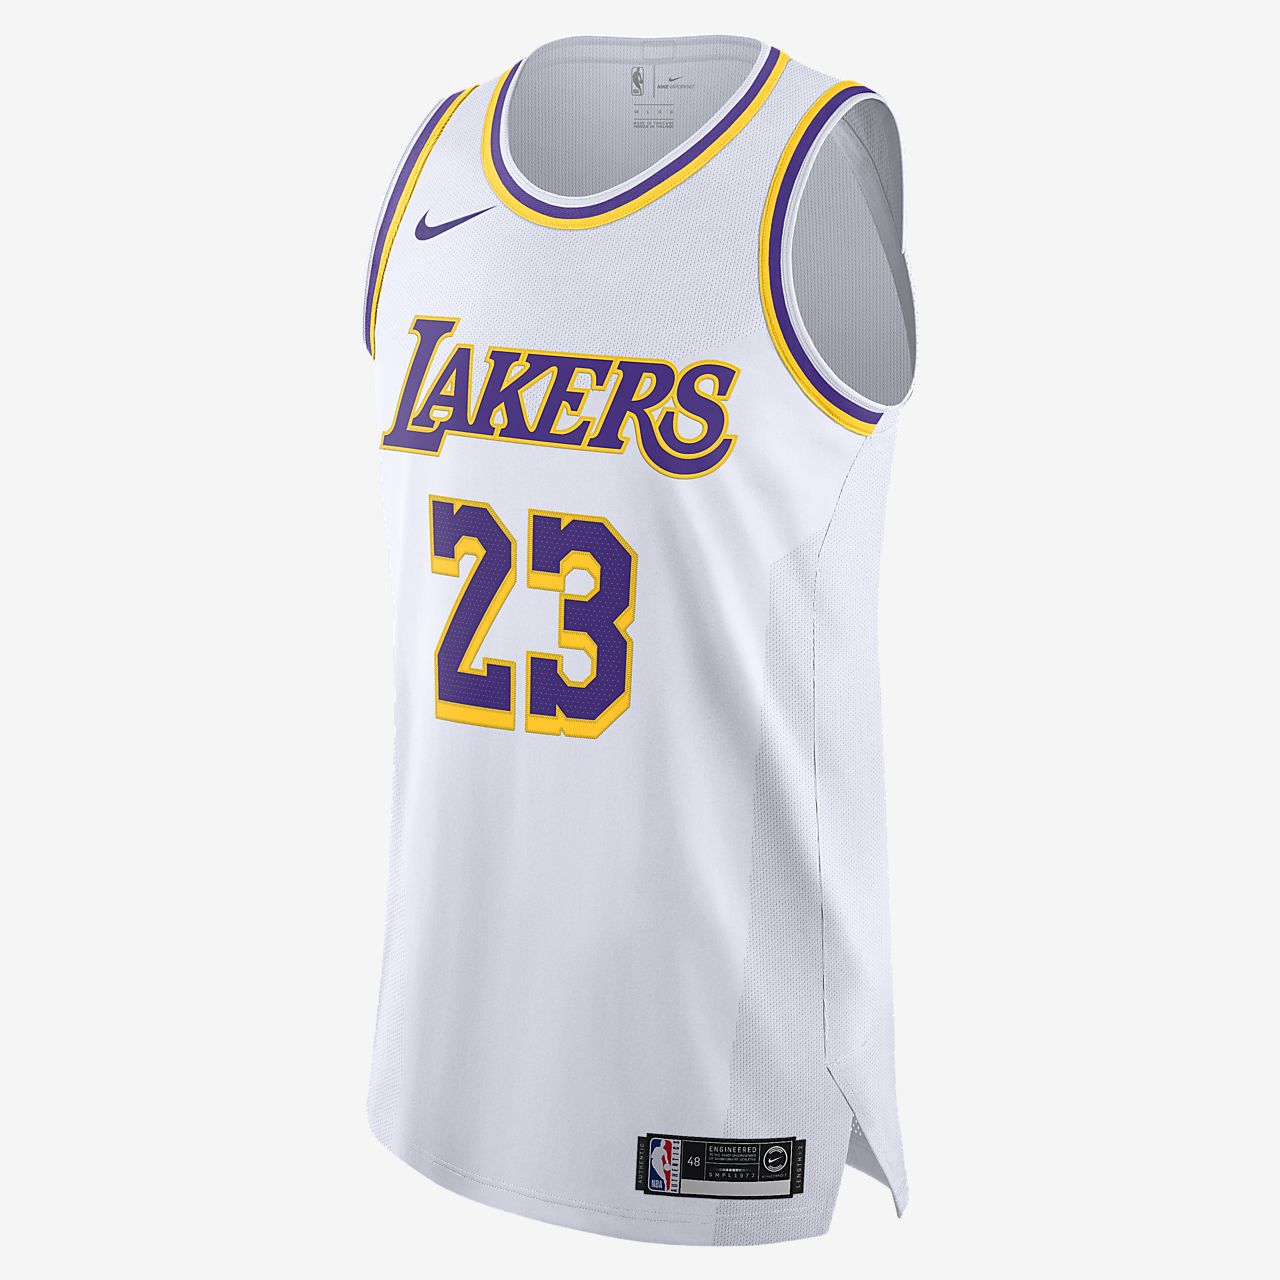 james authentic jersey